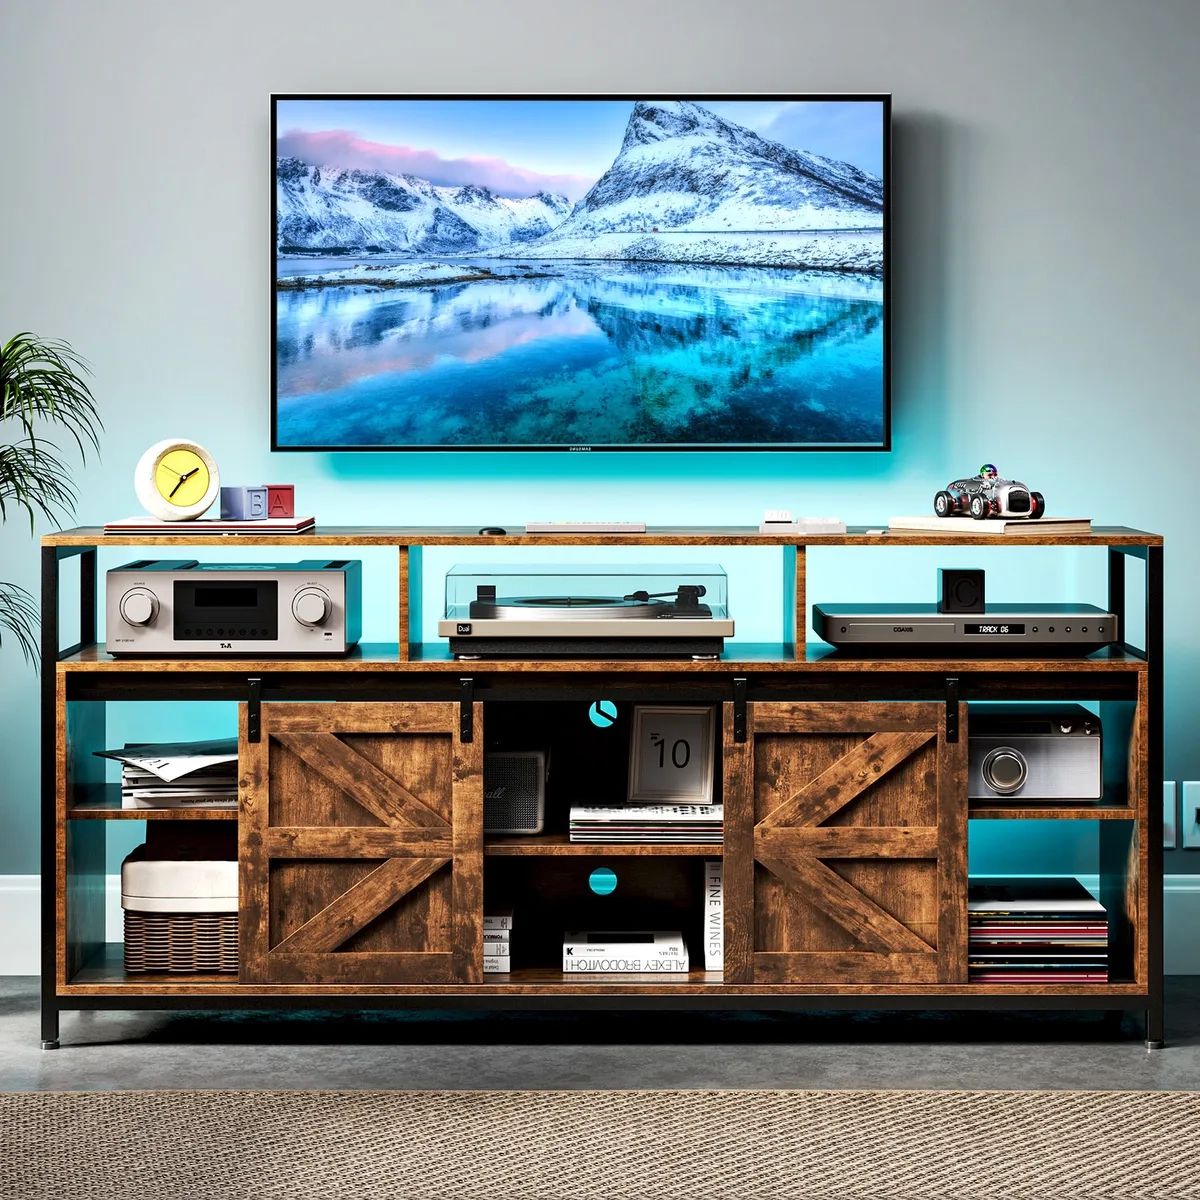 Tc Homeny Tv Stand With Power Station + Rgb Led Tv Cabinet Entertainment  Center | Ebay Regarding Rgb Tv Entertainment Centers (View 4 of 15)